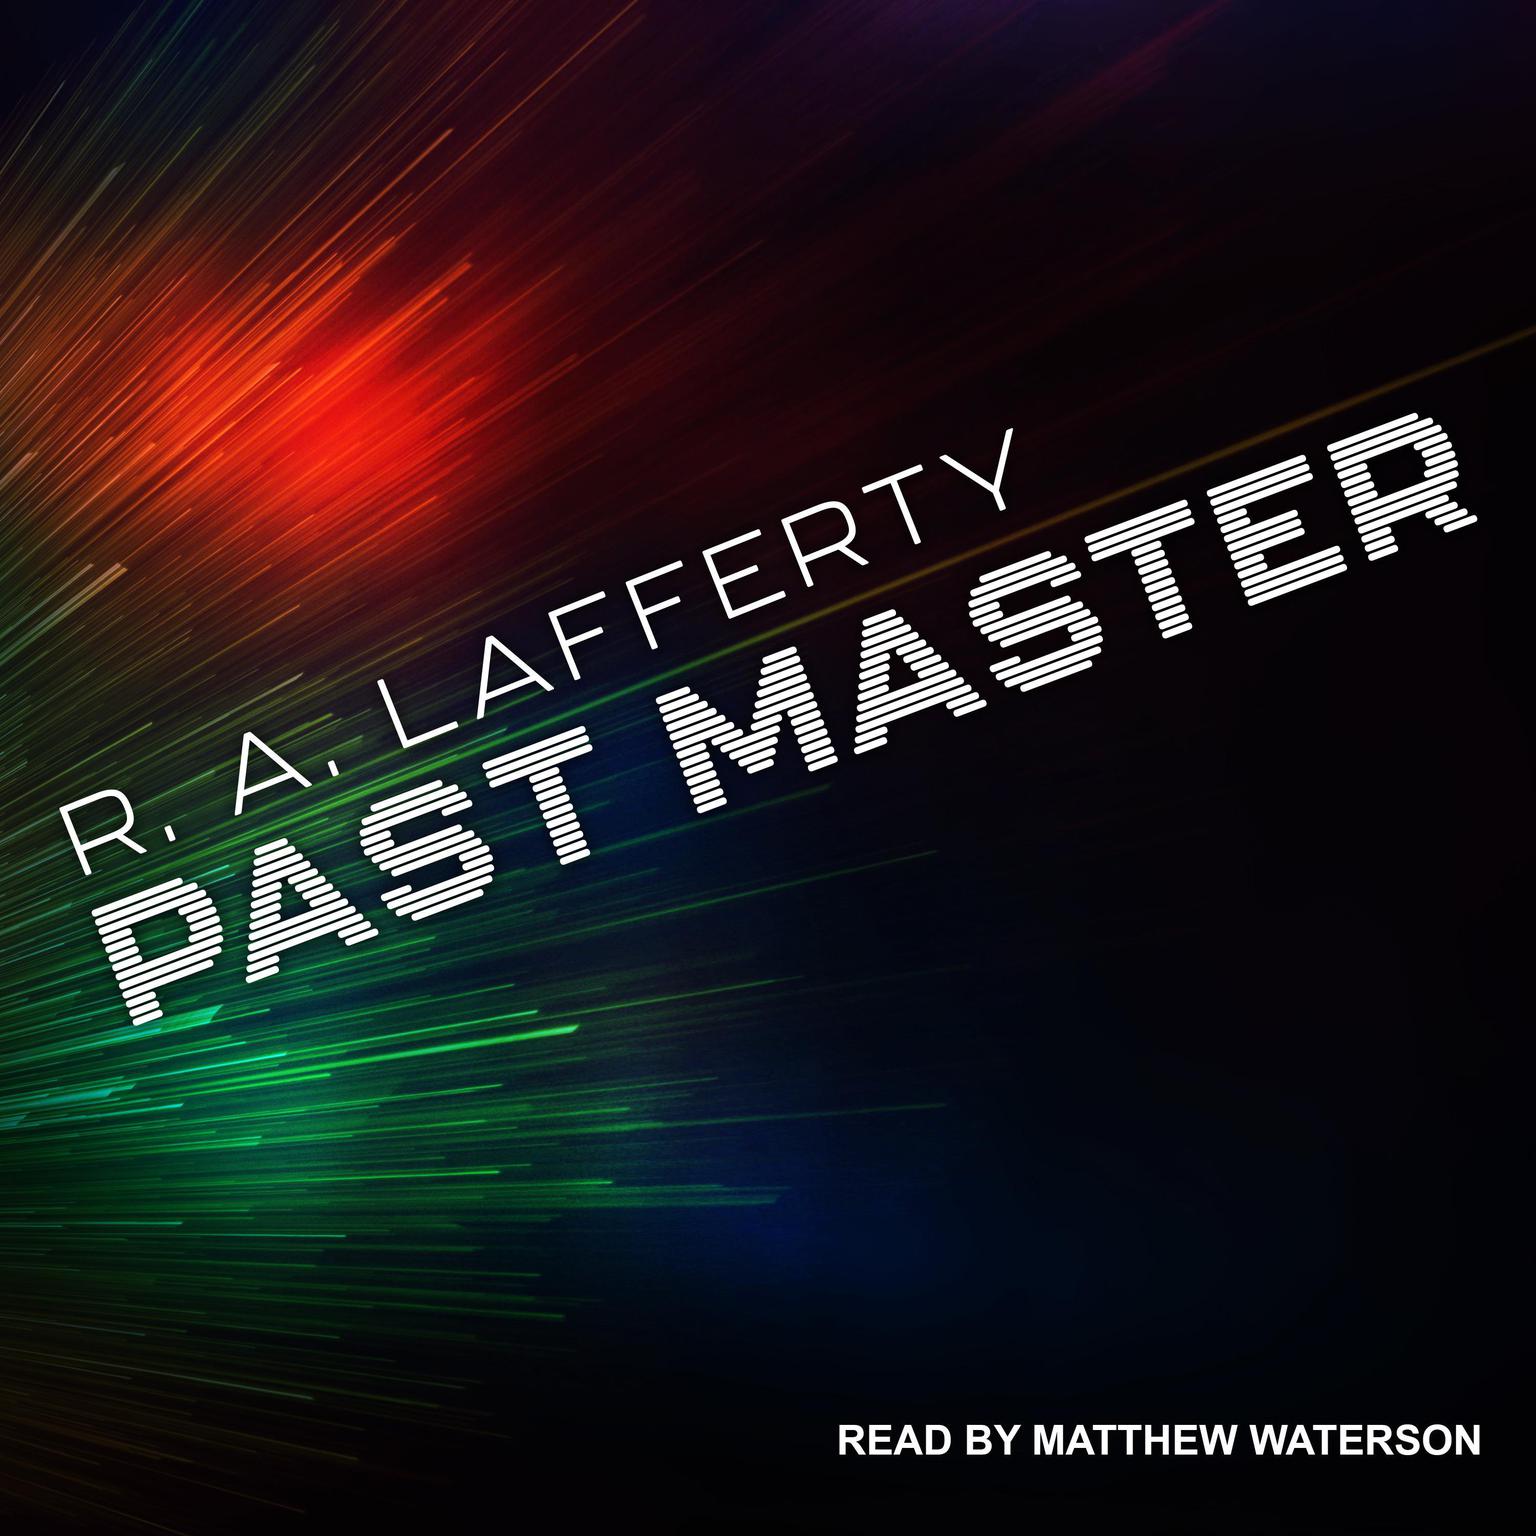 Past Master Audiobook, by R. A. Lafferty